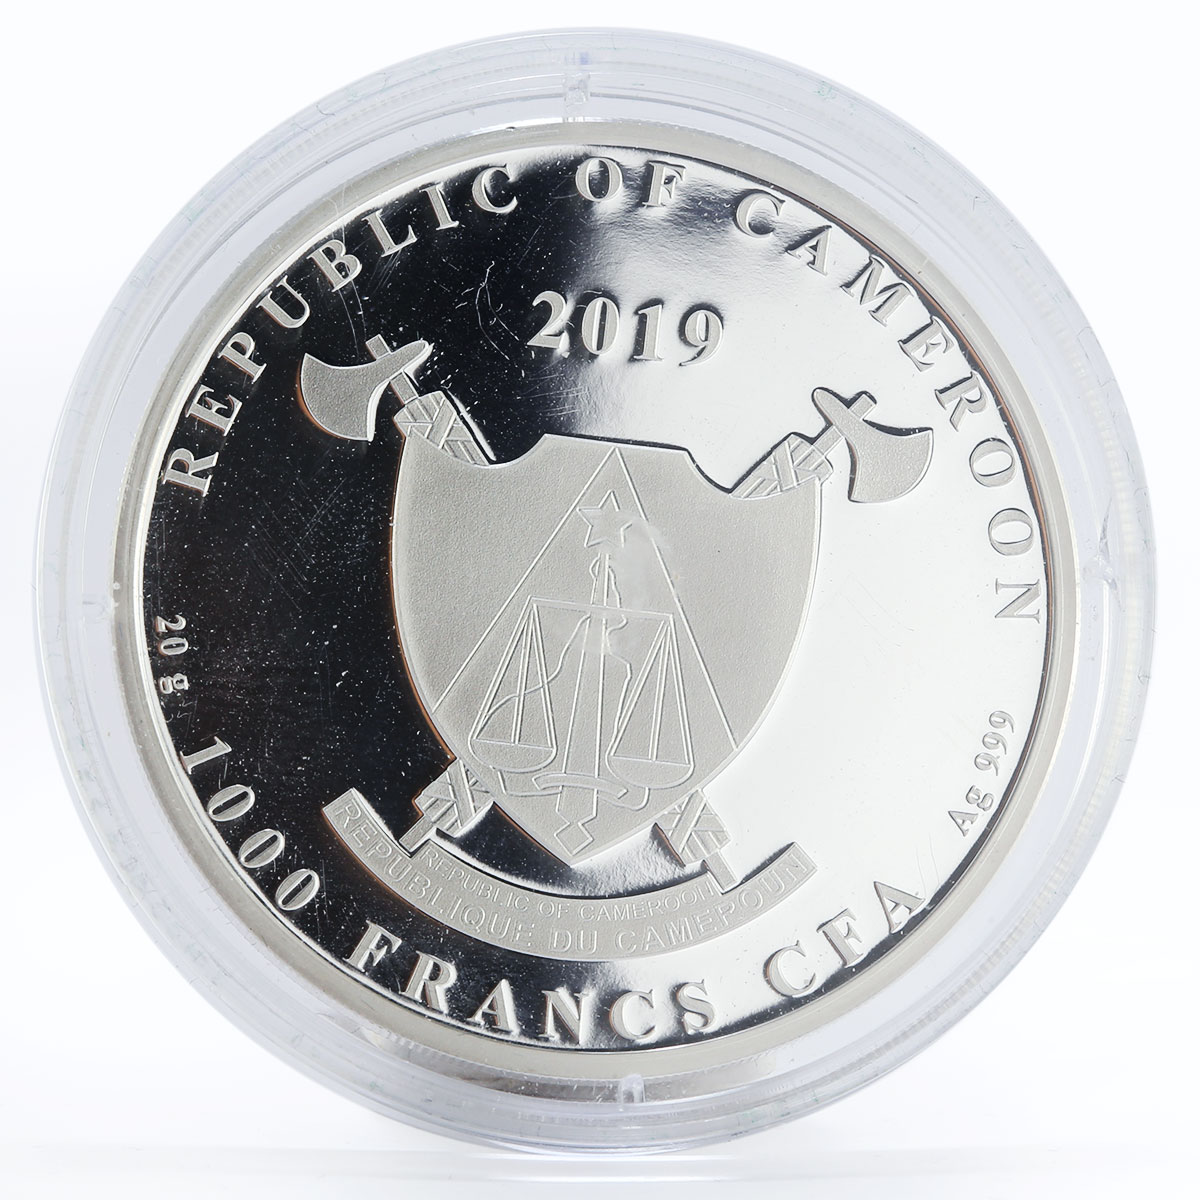 Cameroon 1000 francs Defenders of Fatherland colored silver coin 2019